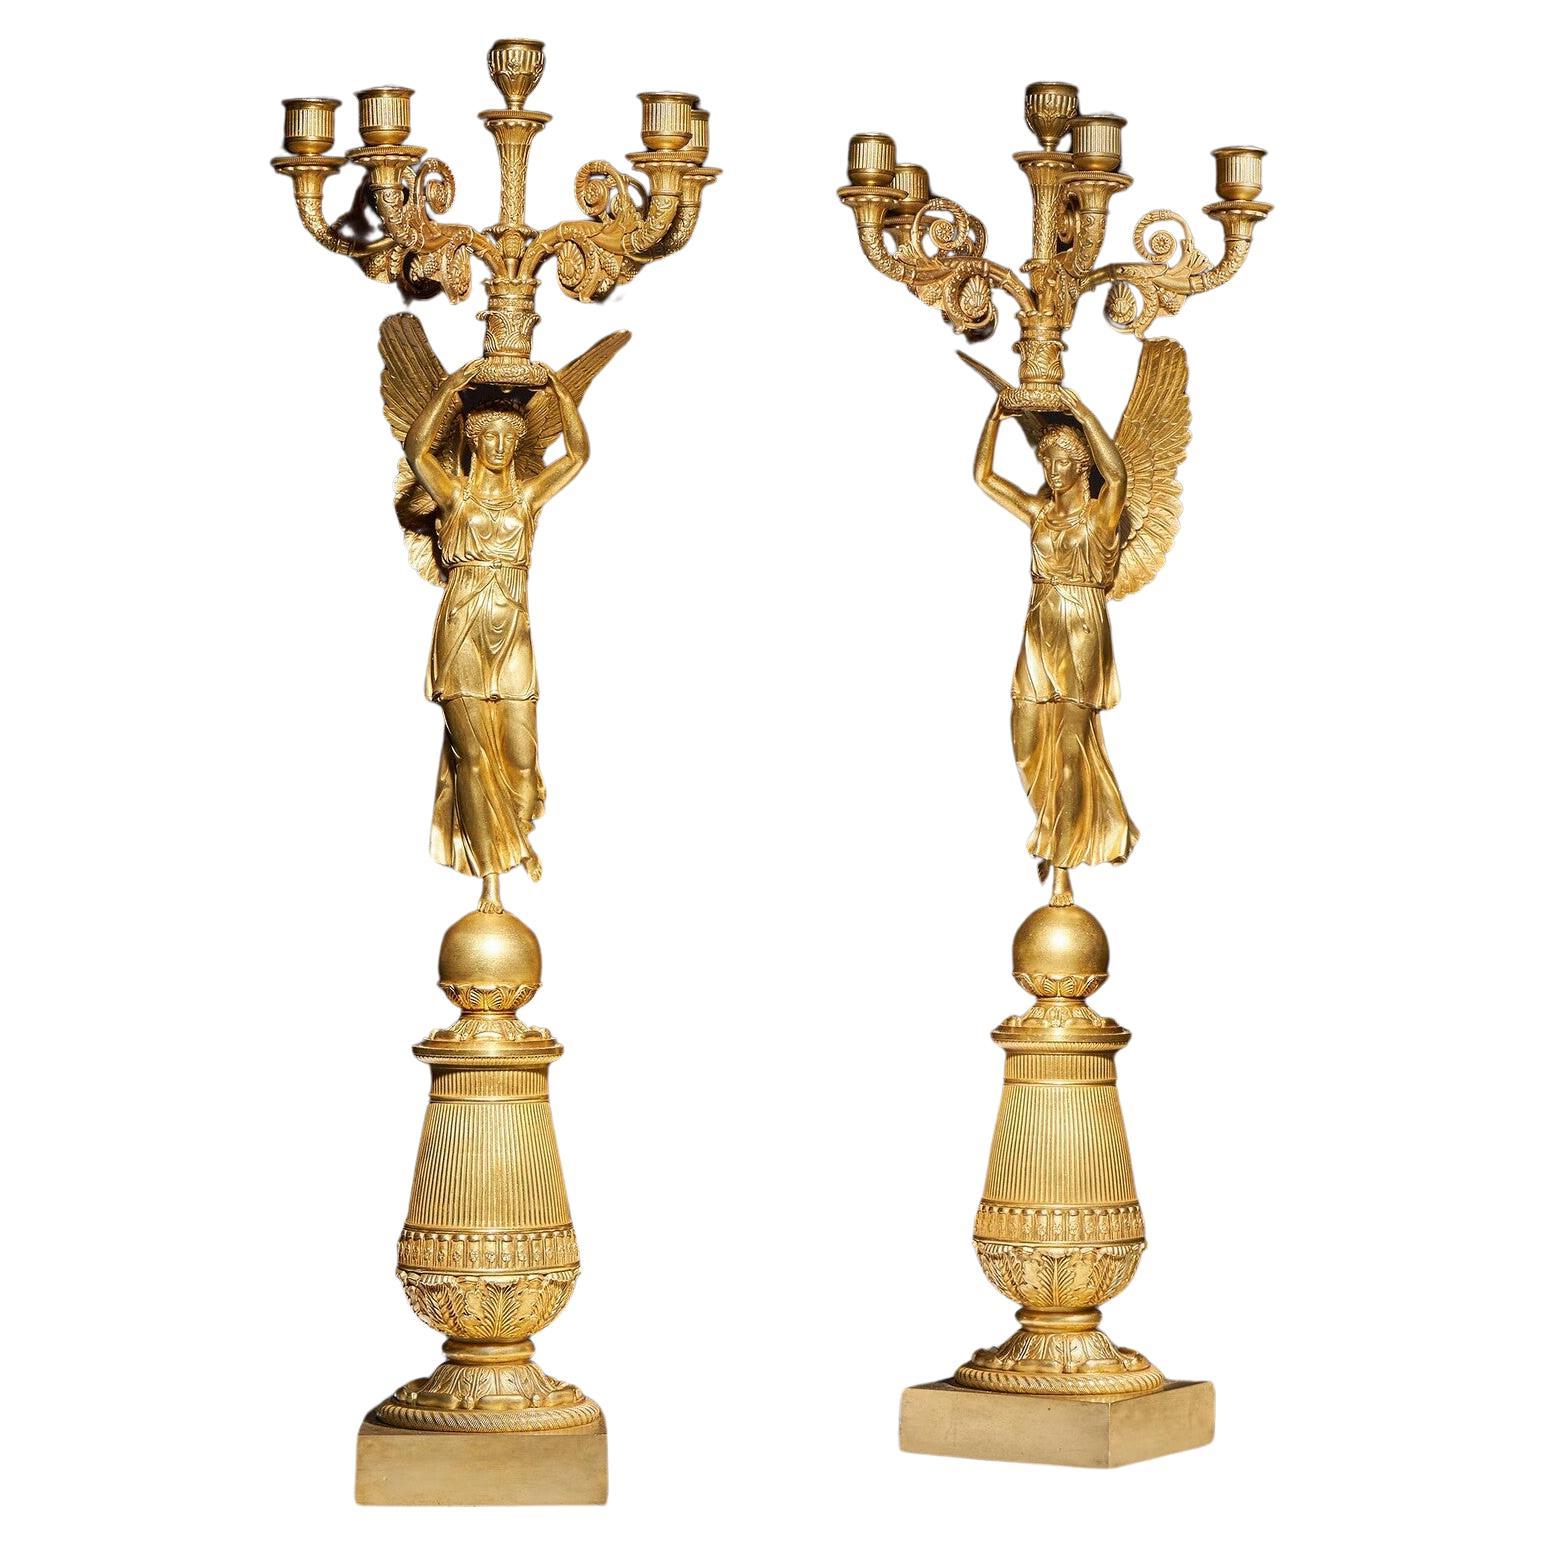 Exceptional Pair of French Late Empire Gilt-bronze Candelabra Attributed to Pier